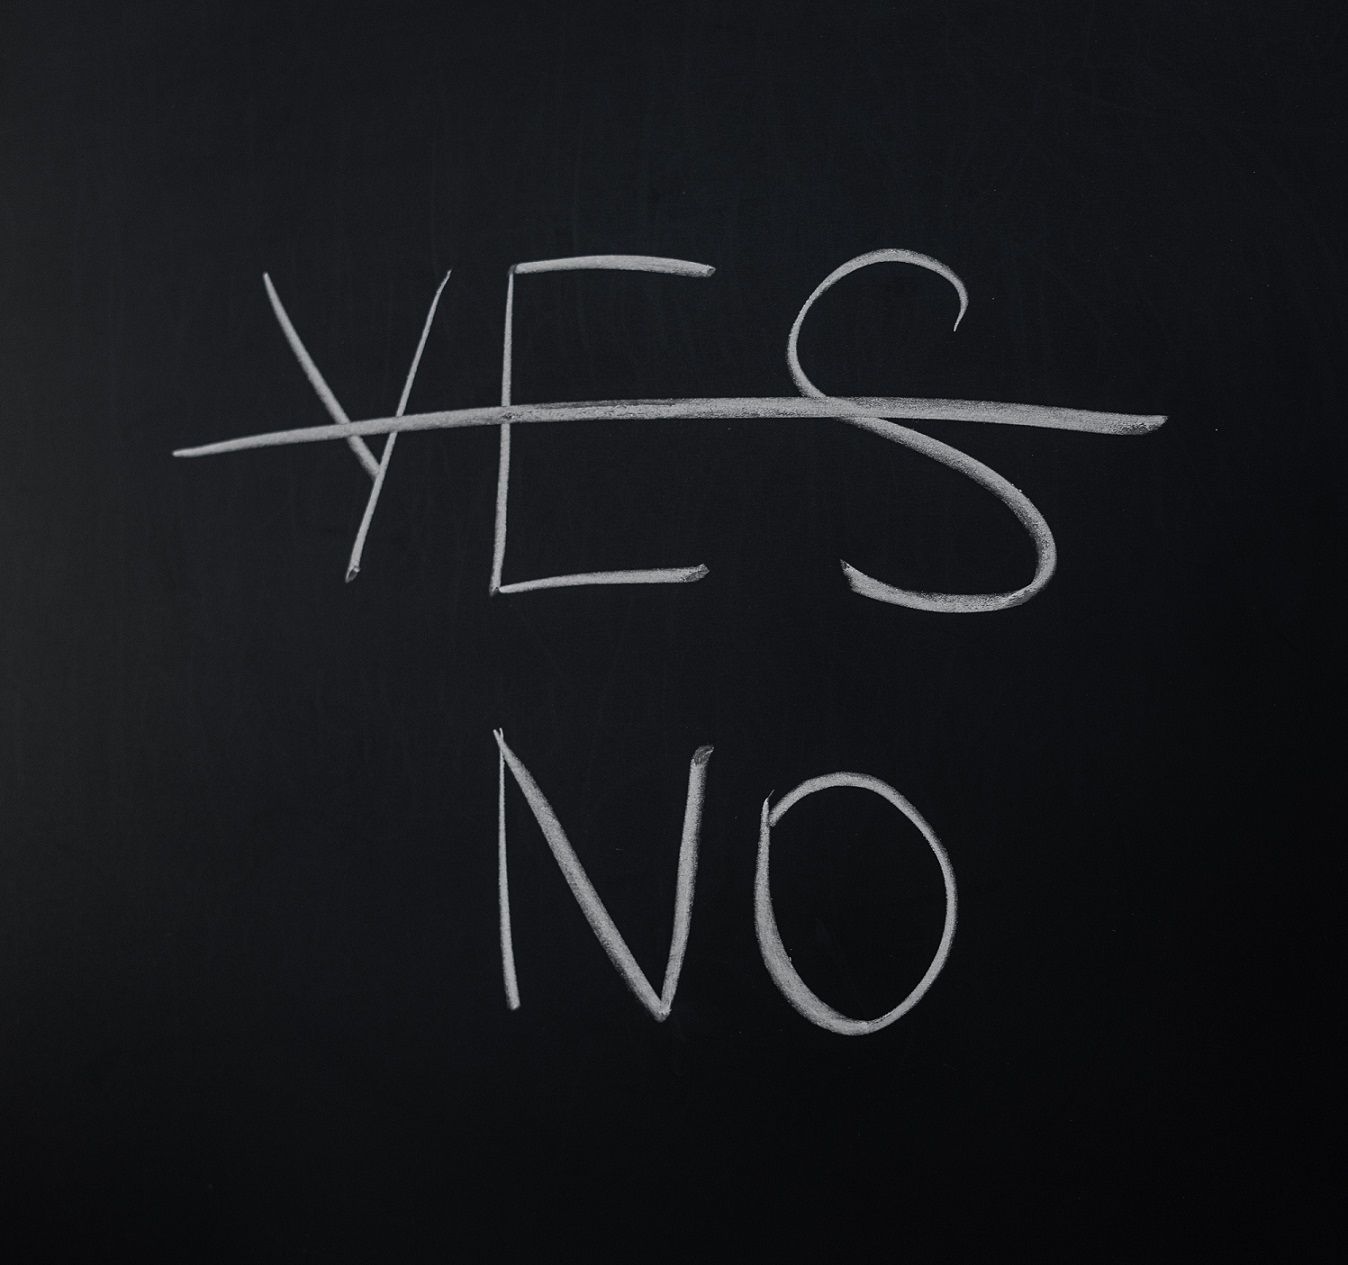 chalkboard with the words "Yes" and "No"